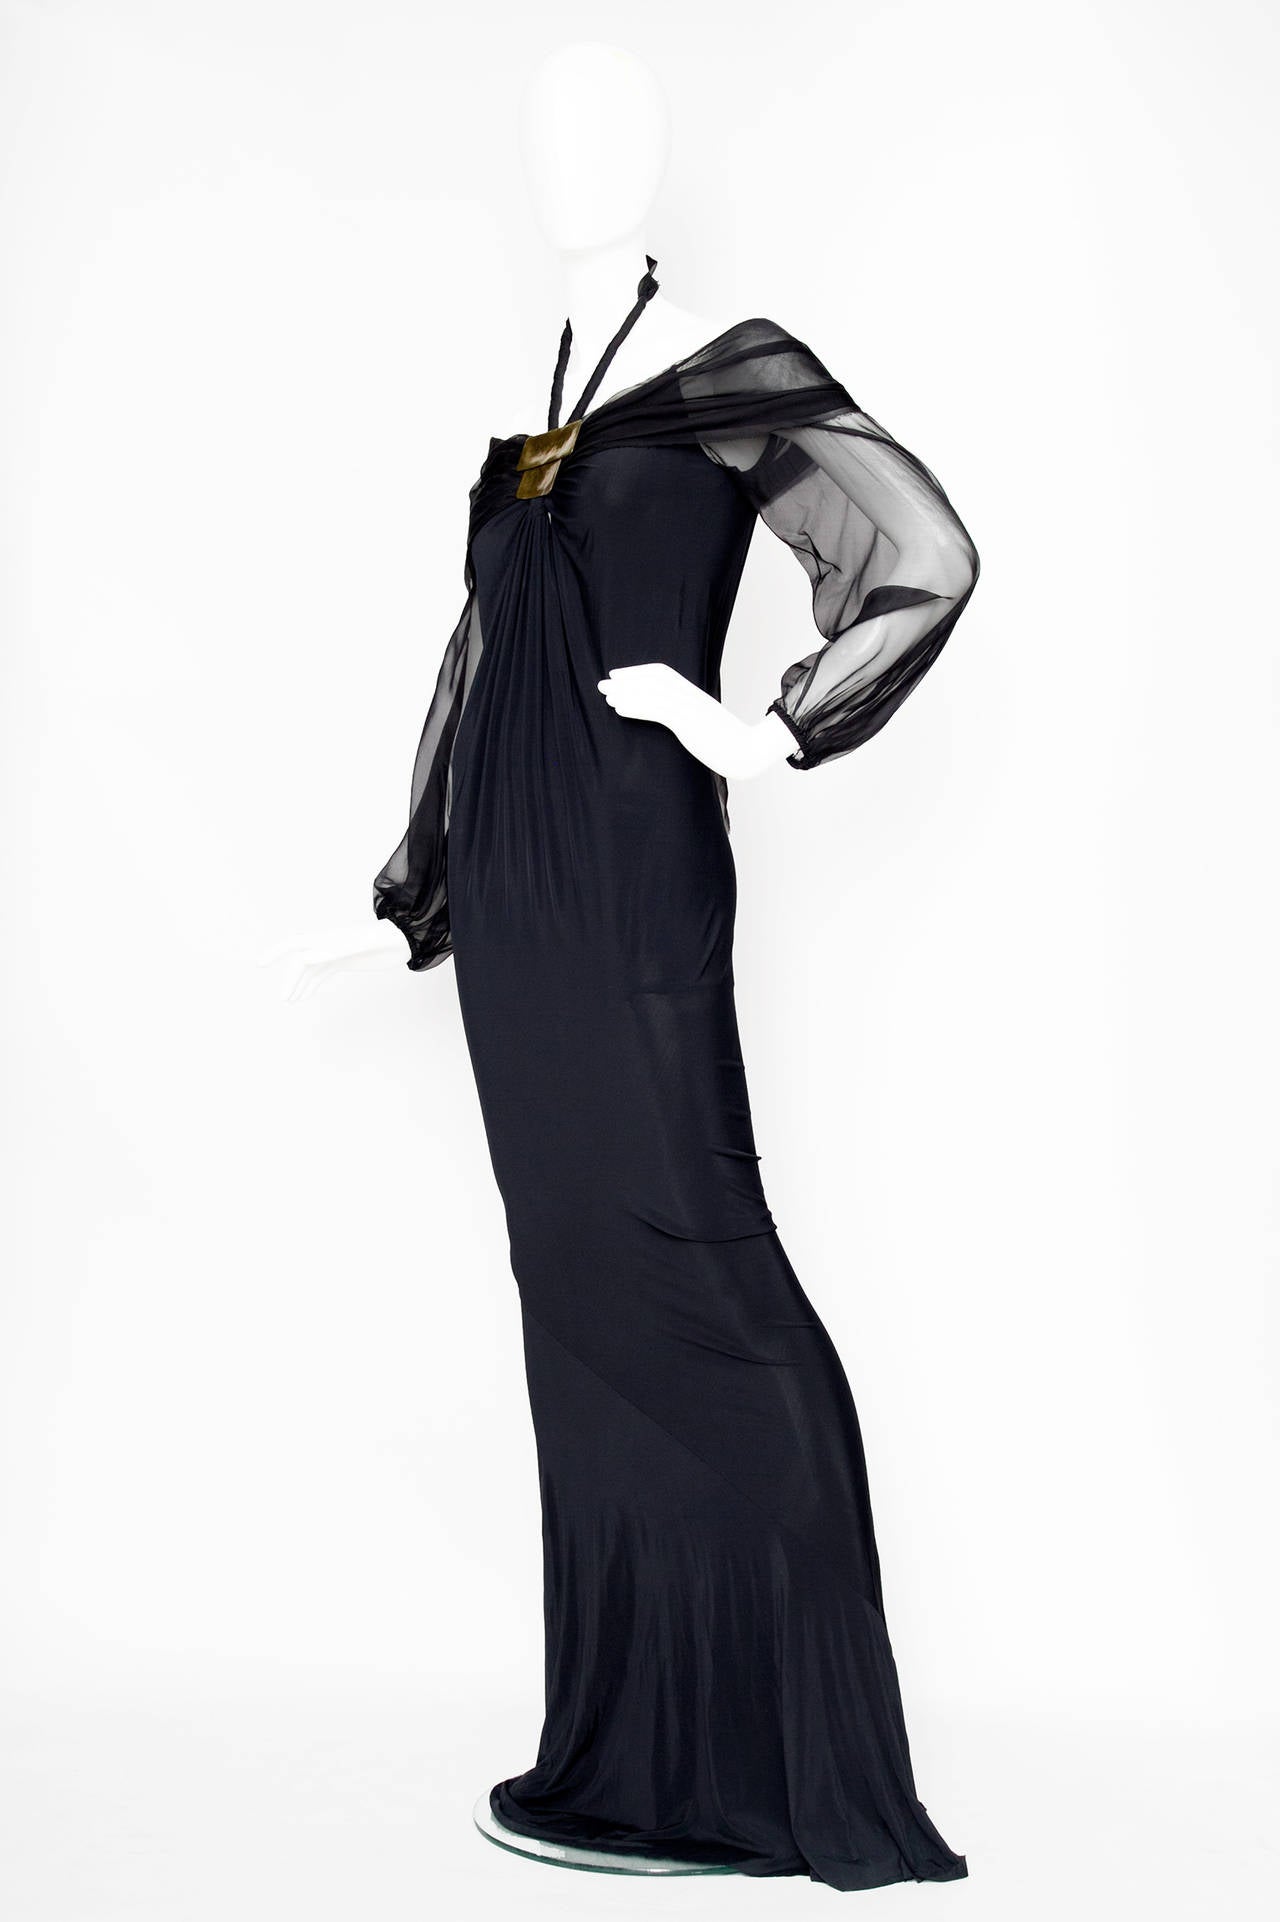 A stunning 1990s Donna Karan floor-length black evening gown in silk jersey. The dress has long sheer sleeves and an off the shoulder neckline, both in a light silk chiffon. In the front the two fabrics are gathered by a gold metal plate detail and